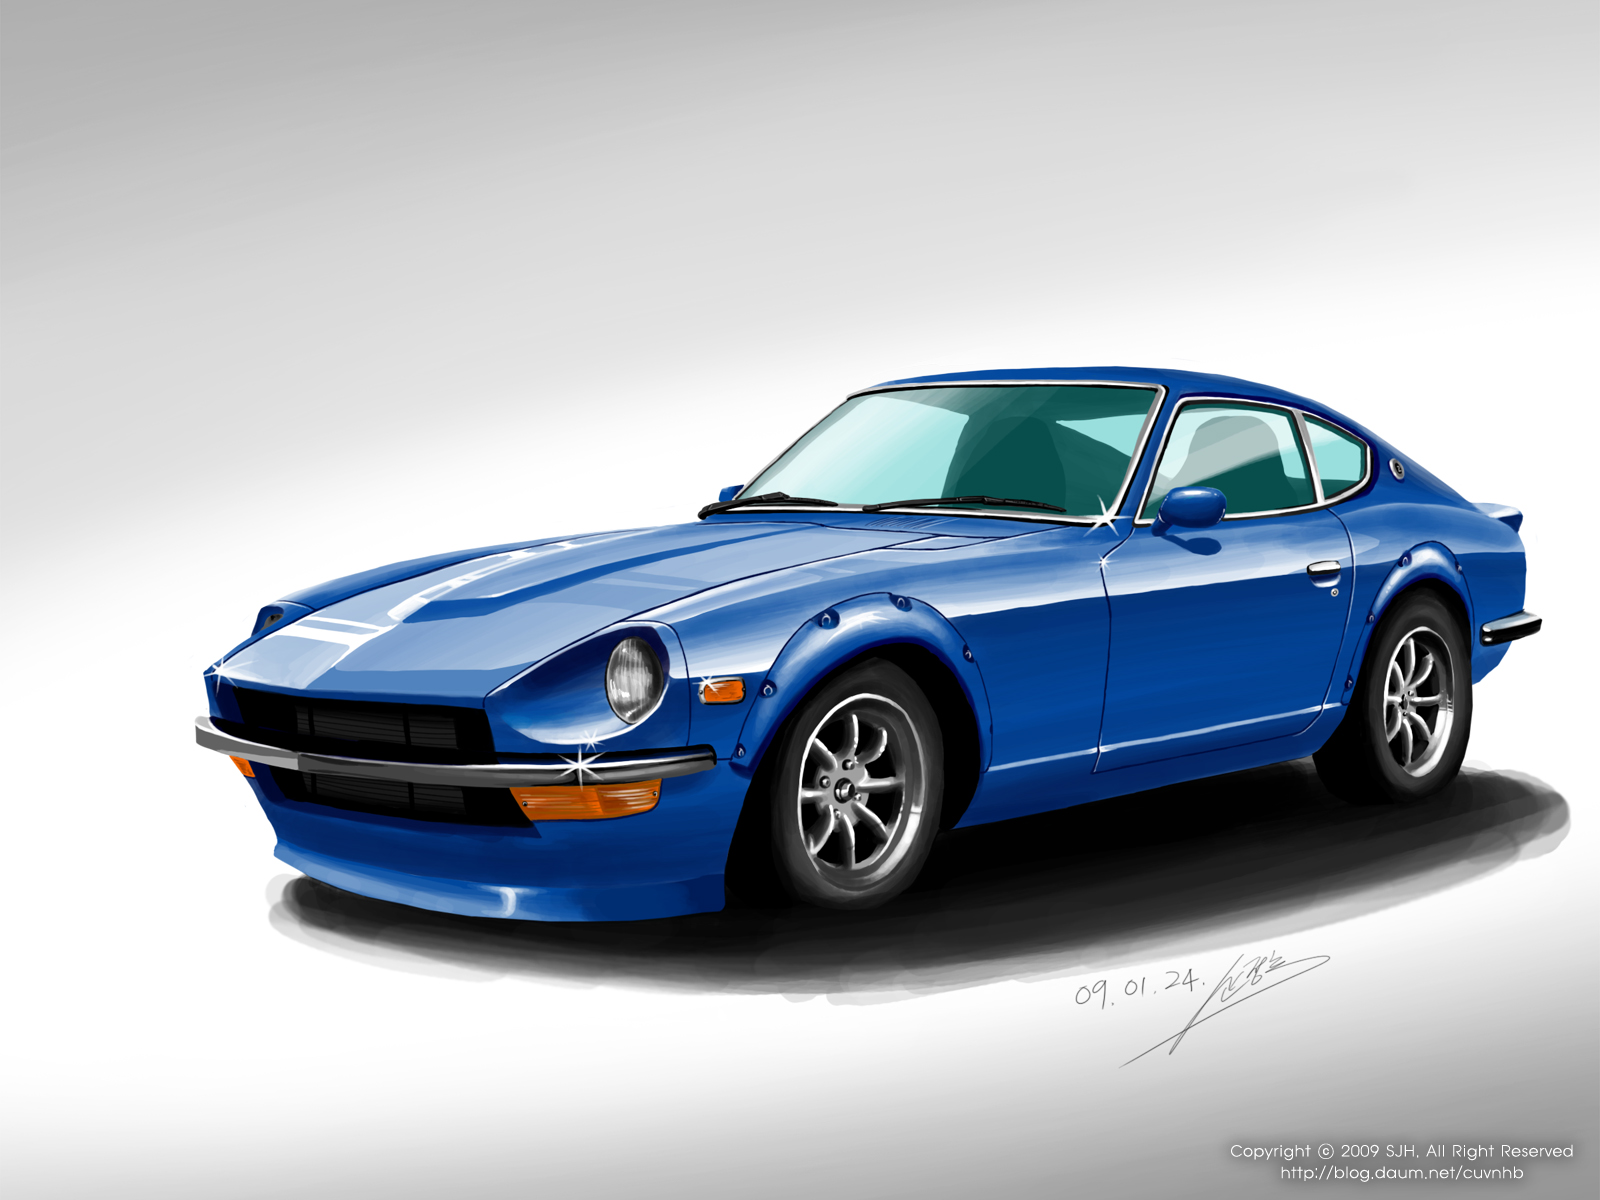 Amazing Nissan Fairlady Z Pictures & Backgrounds